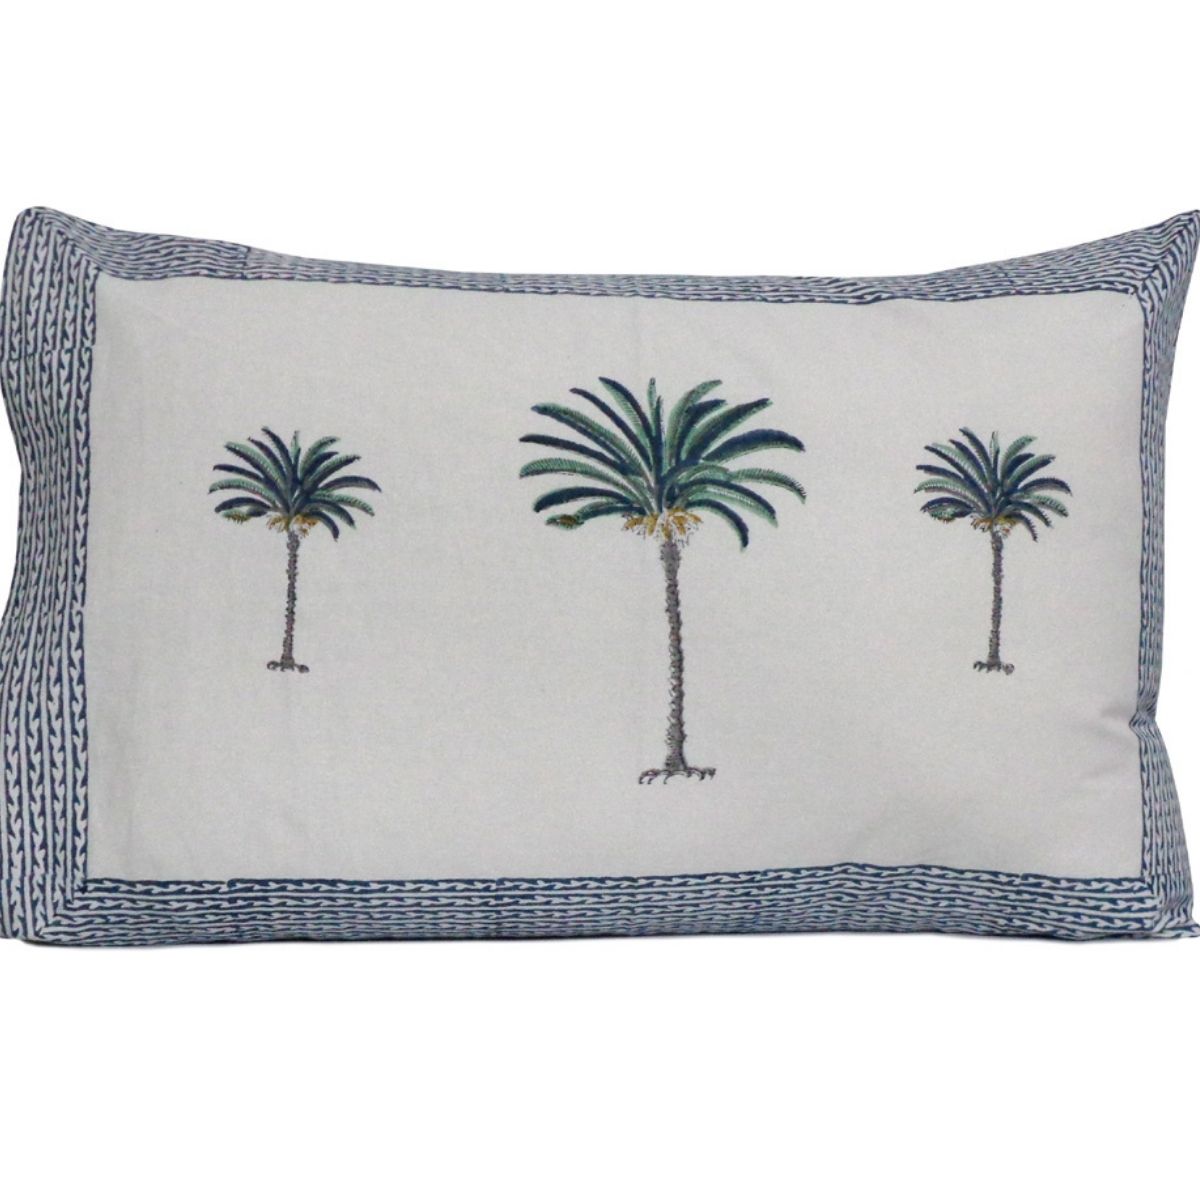 Palm tree pillow cases- set of 2 -Blue